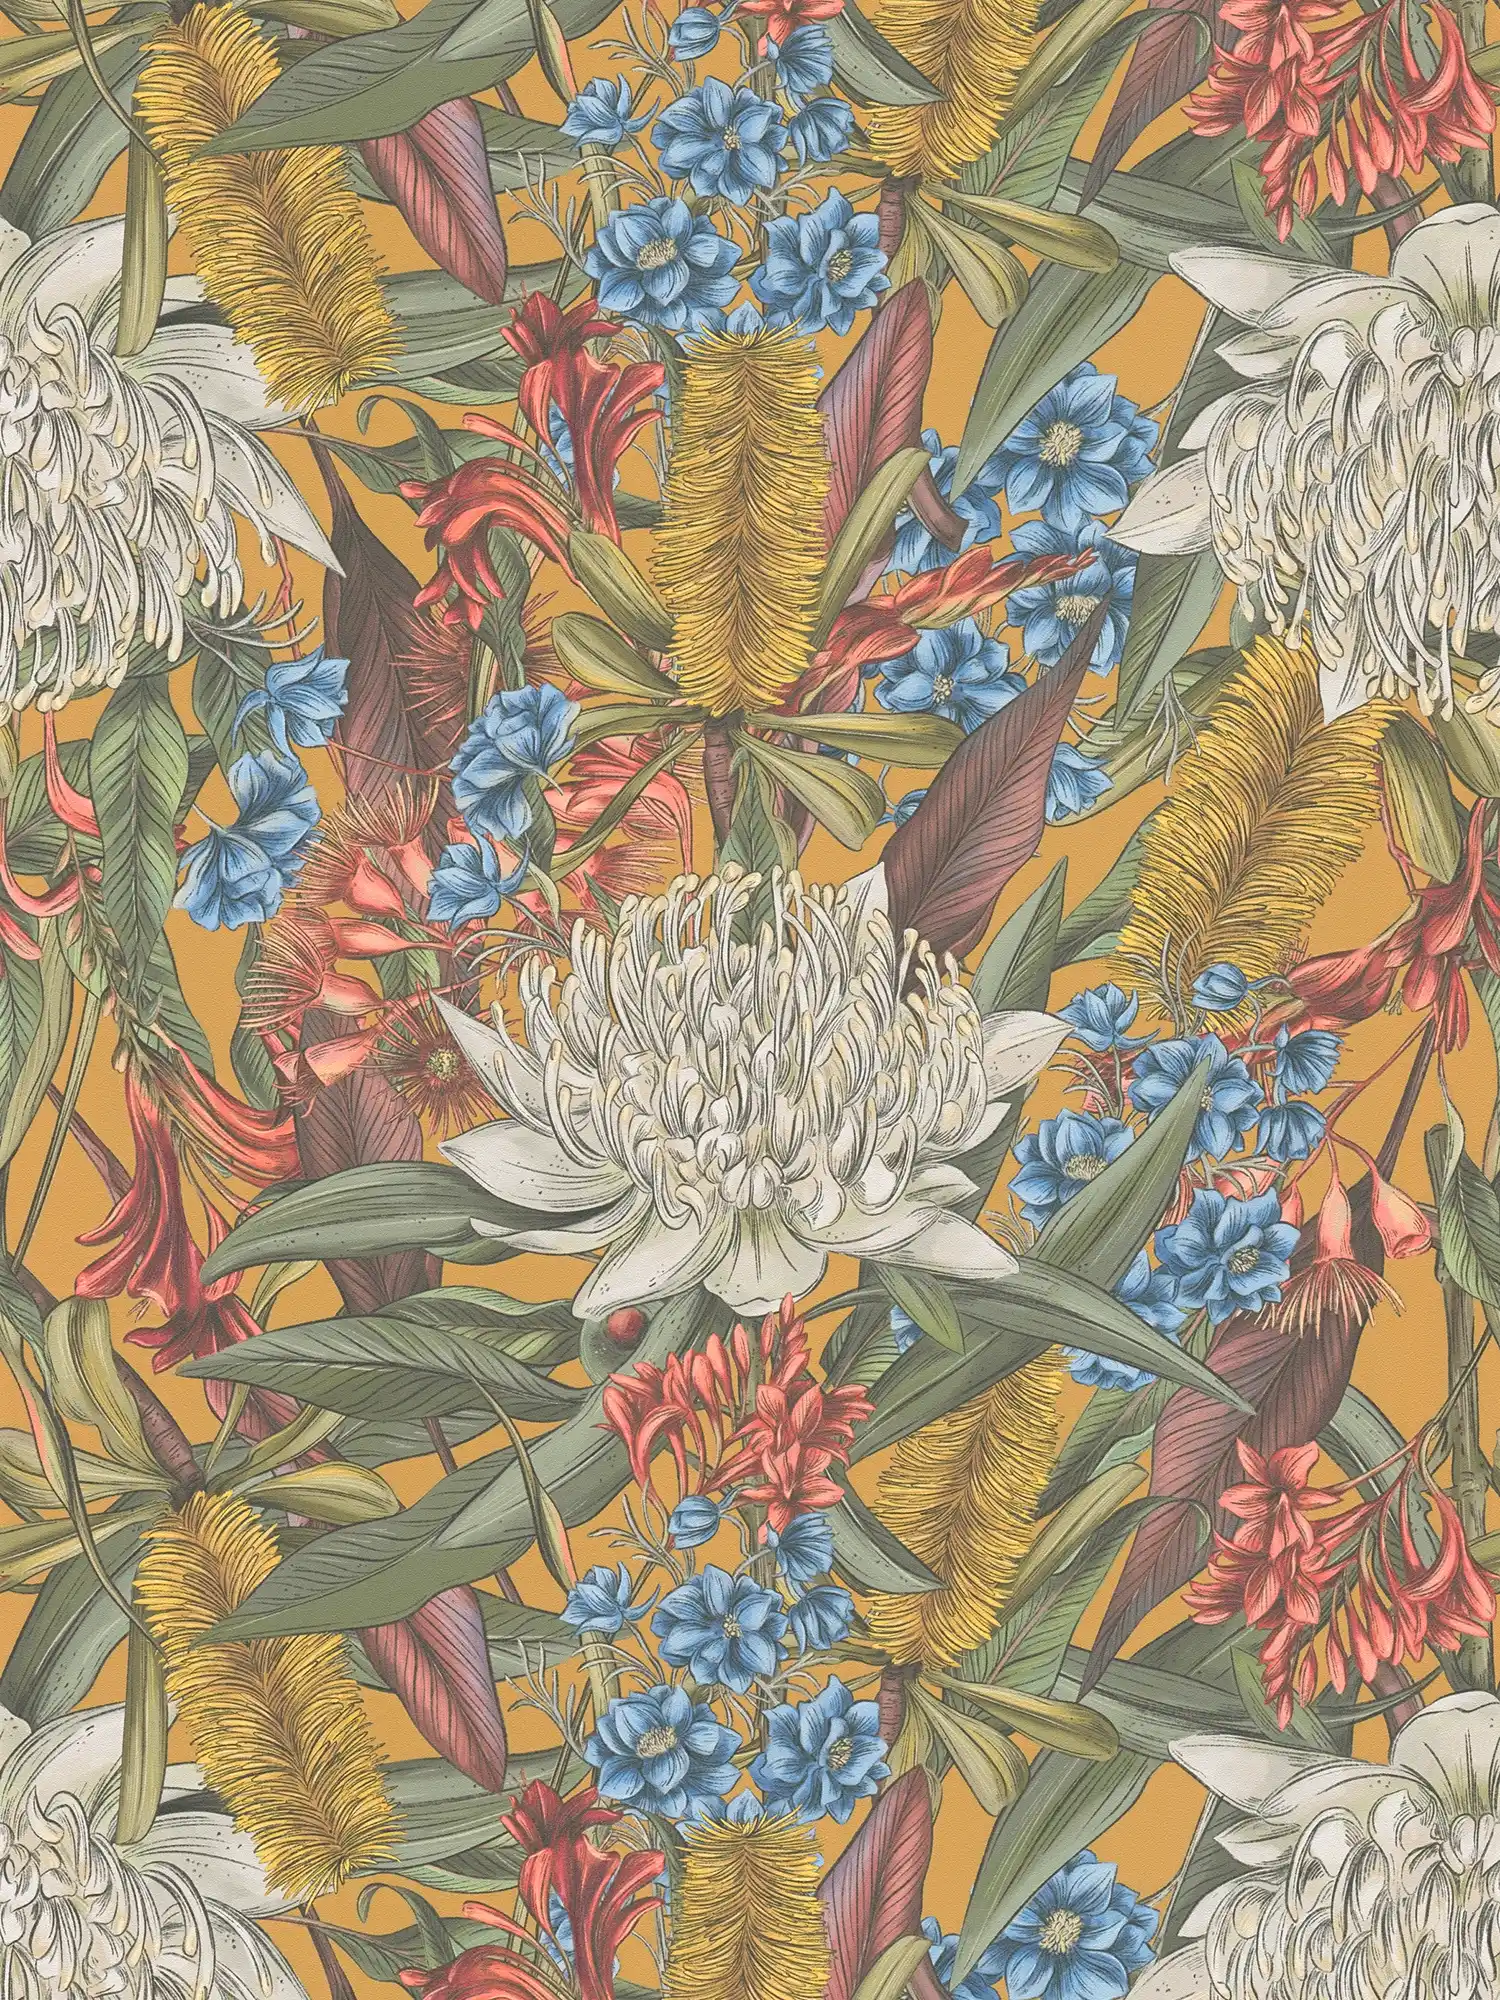 Floral style jungle wallpaper with leaves & flowers textured matt - multicoloured, yellow, green
